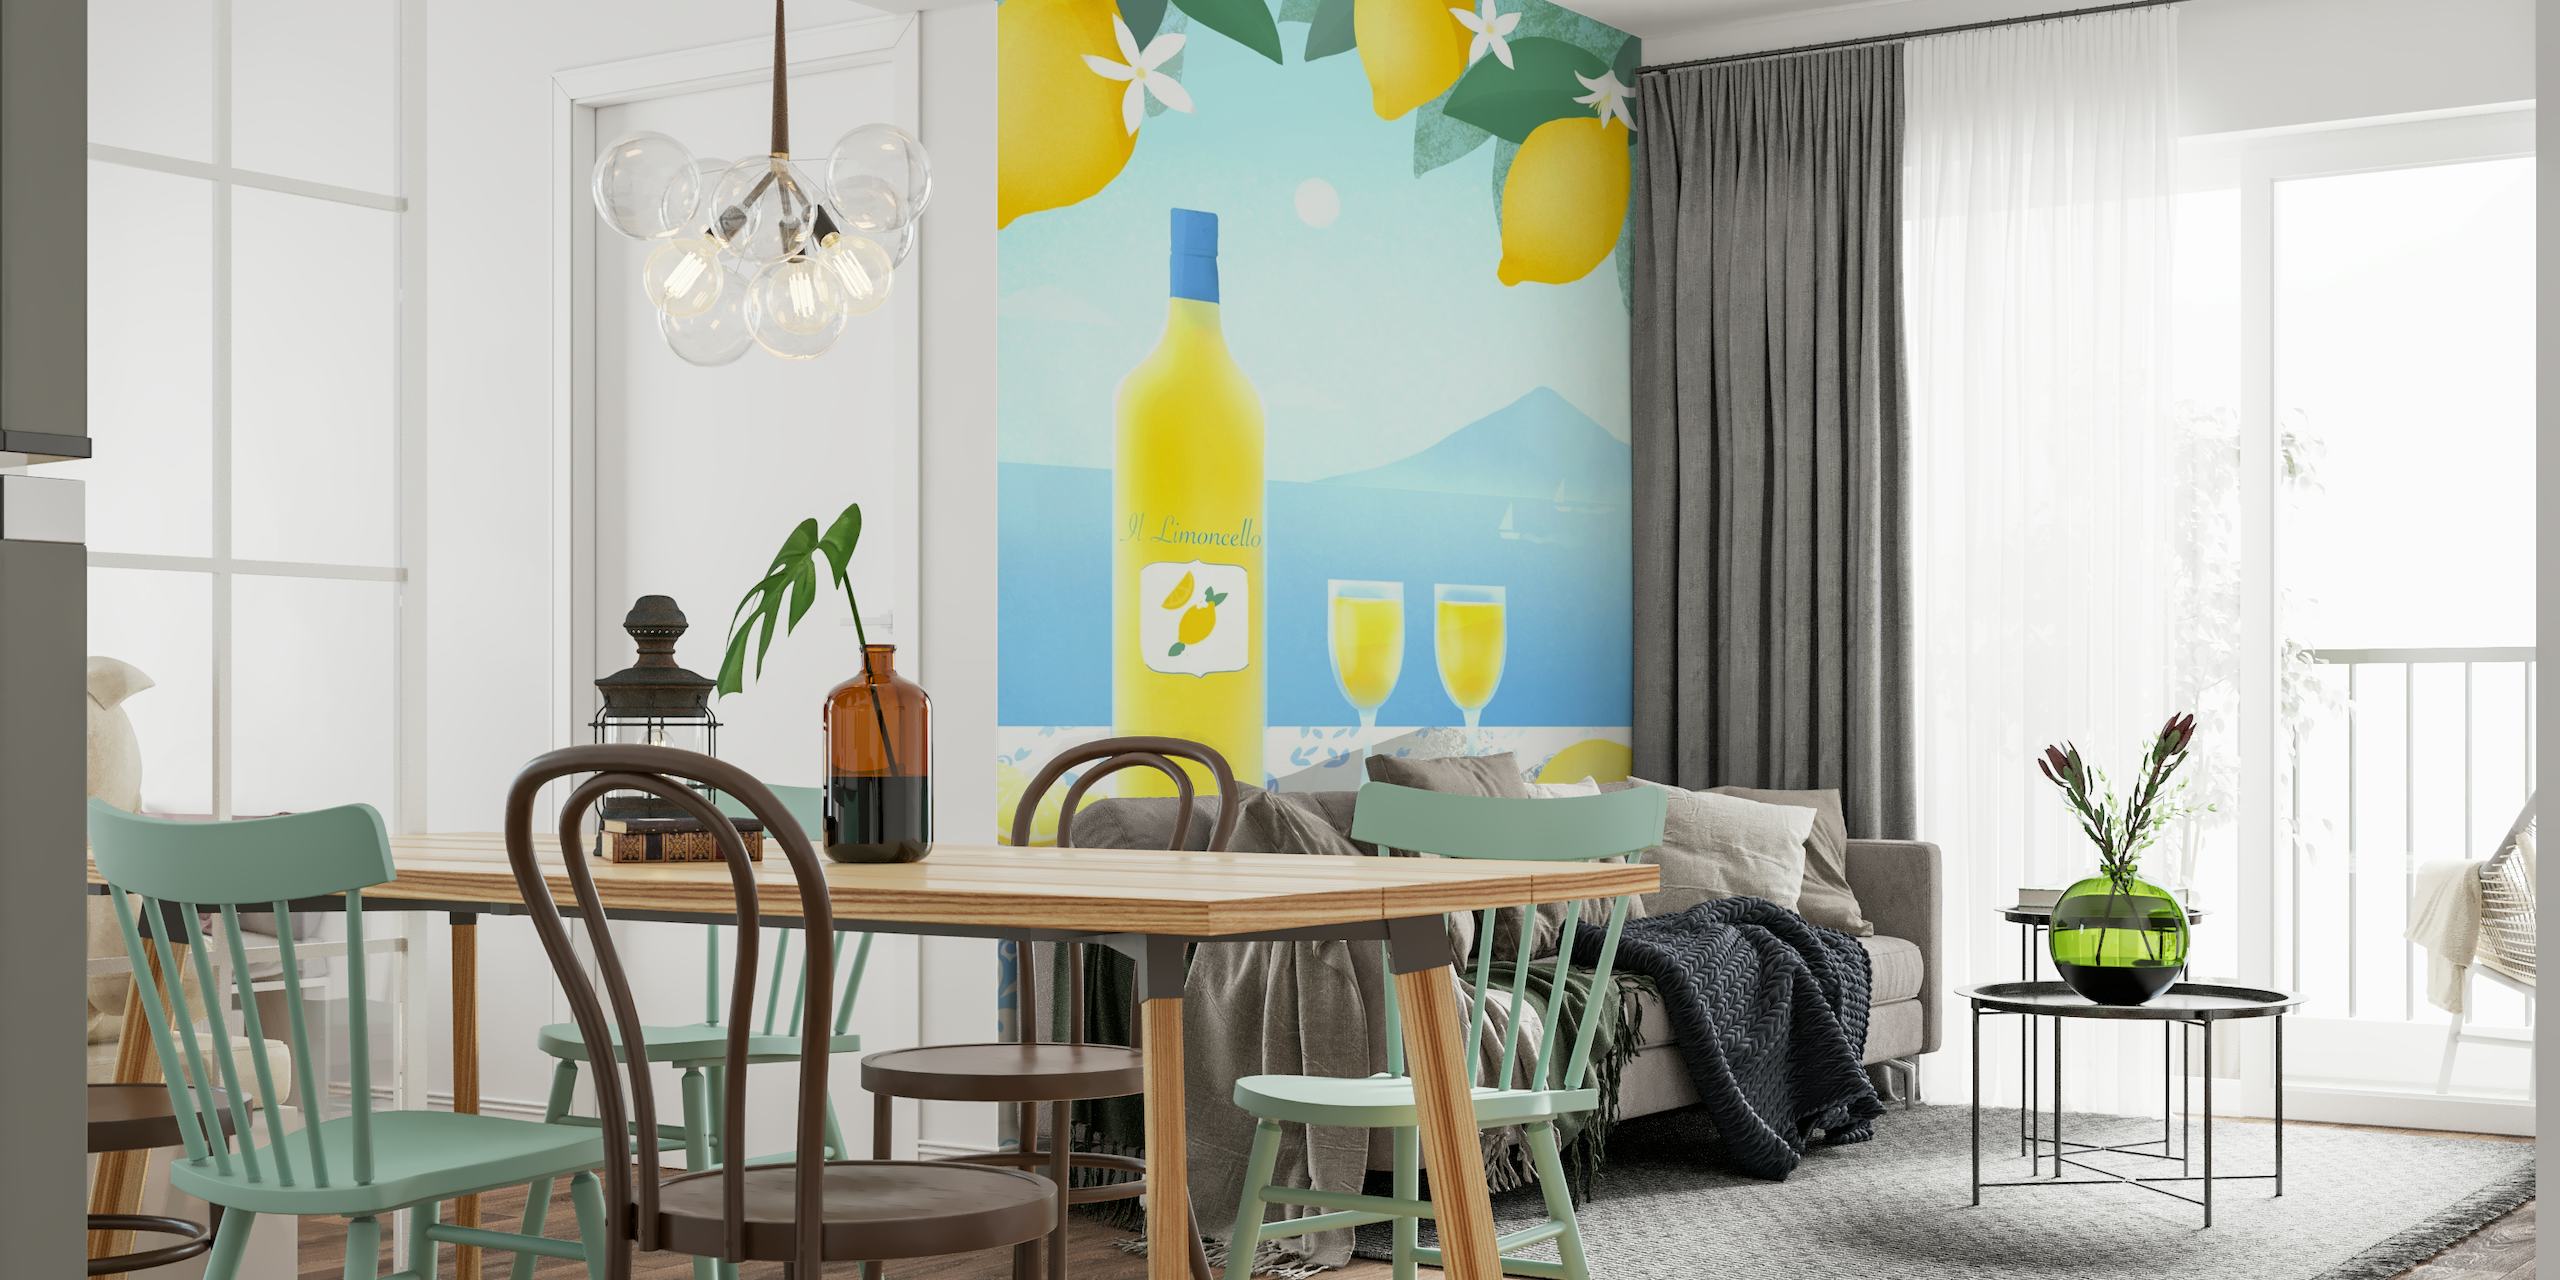 Limoncello wall mural with lemon trees, limoncello bottle, glasses, sea view, and Mediterranean tiles